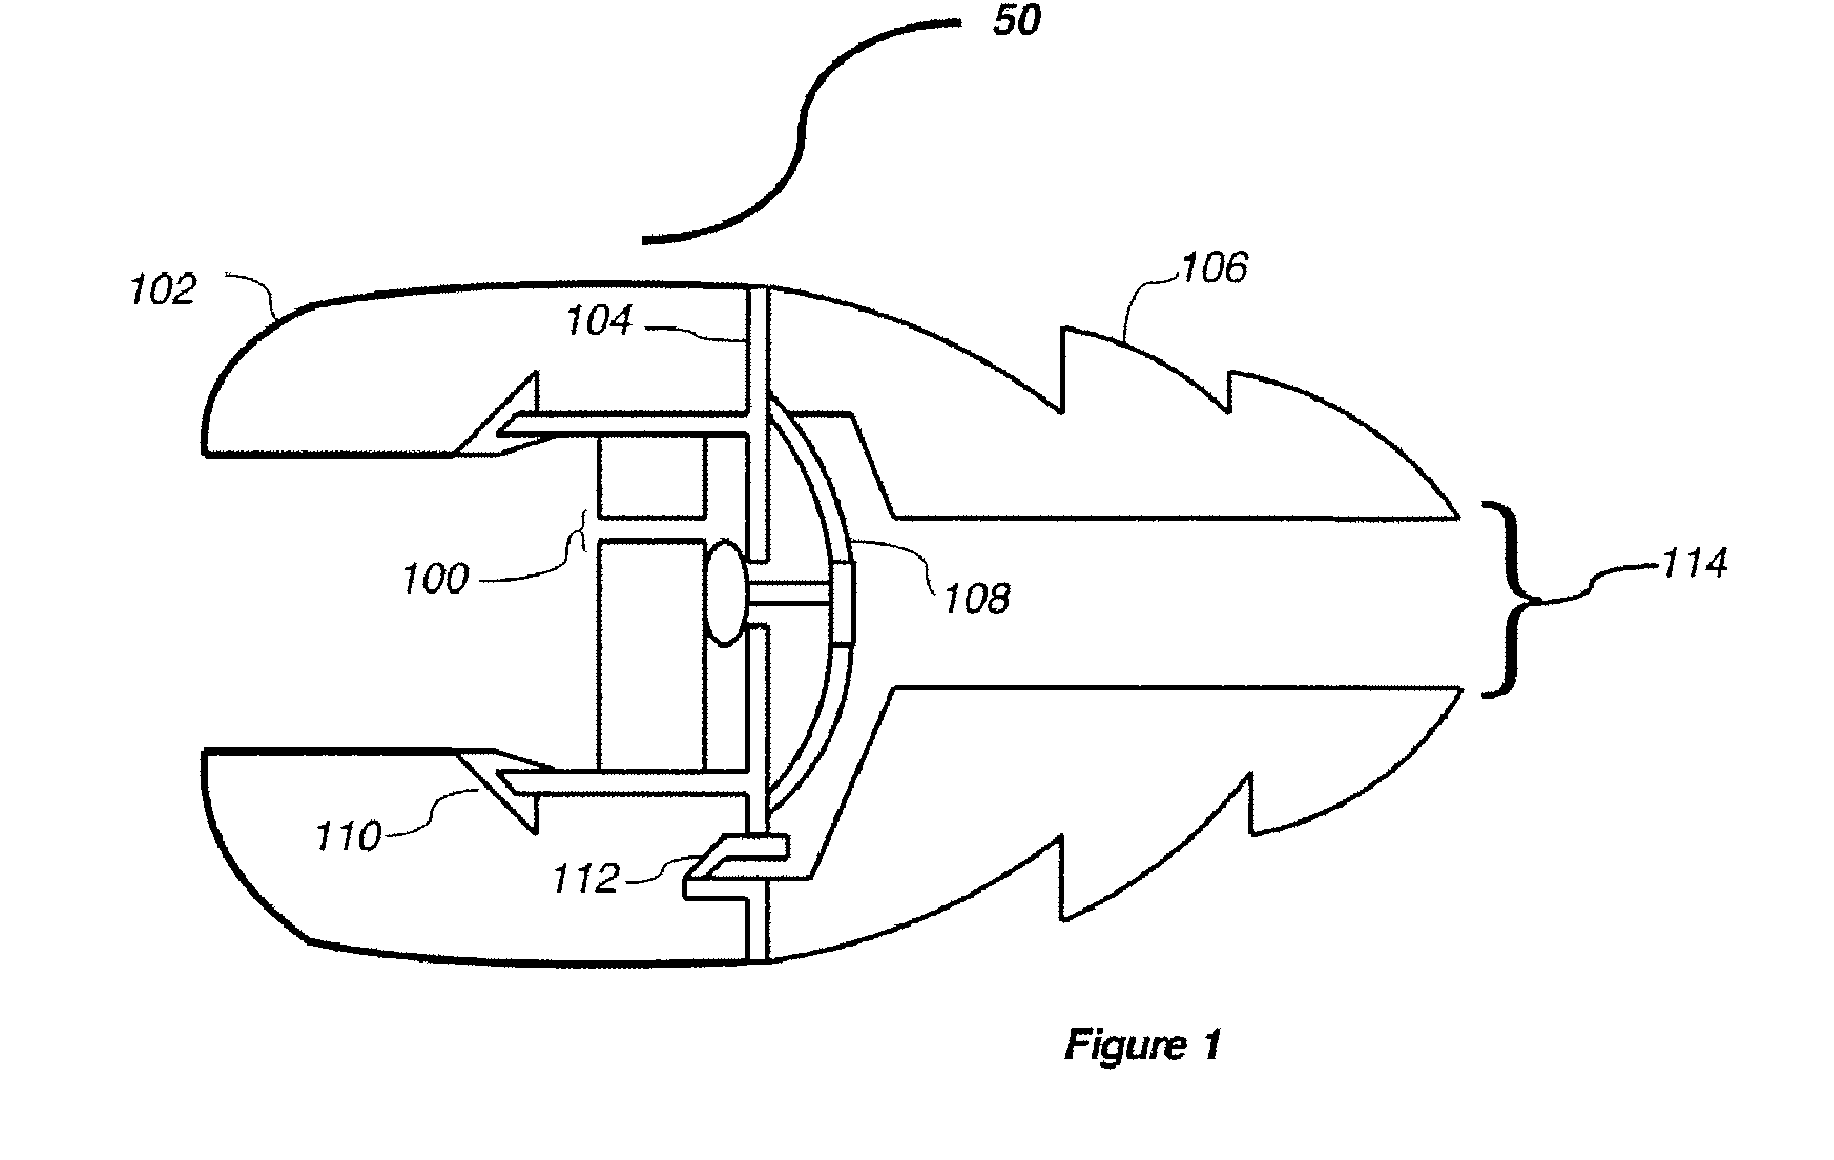 Novel hearing protection device and method and secure earbud assembly